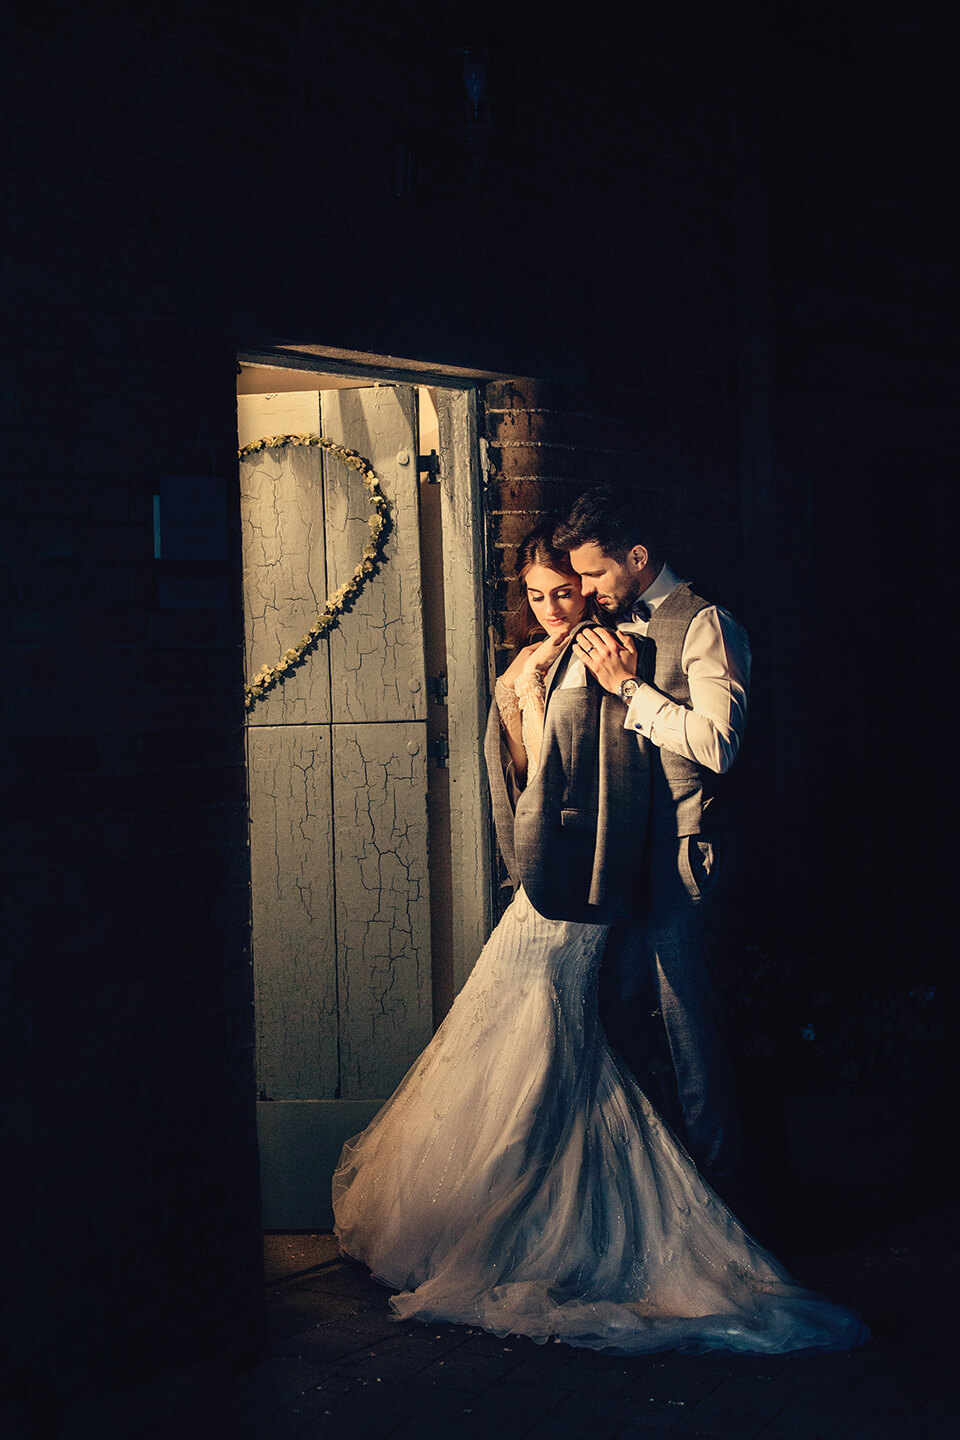 A bride and groom take a moment away from guests on their winter wedding day at Bassmead Manor Barns